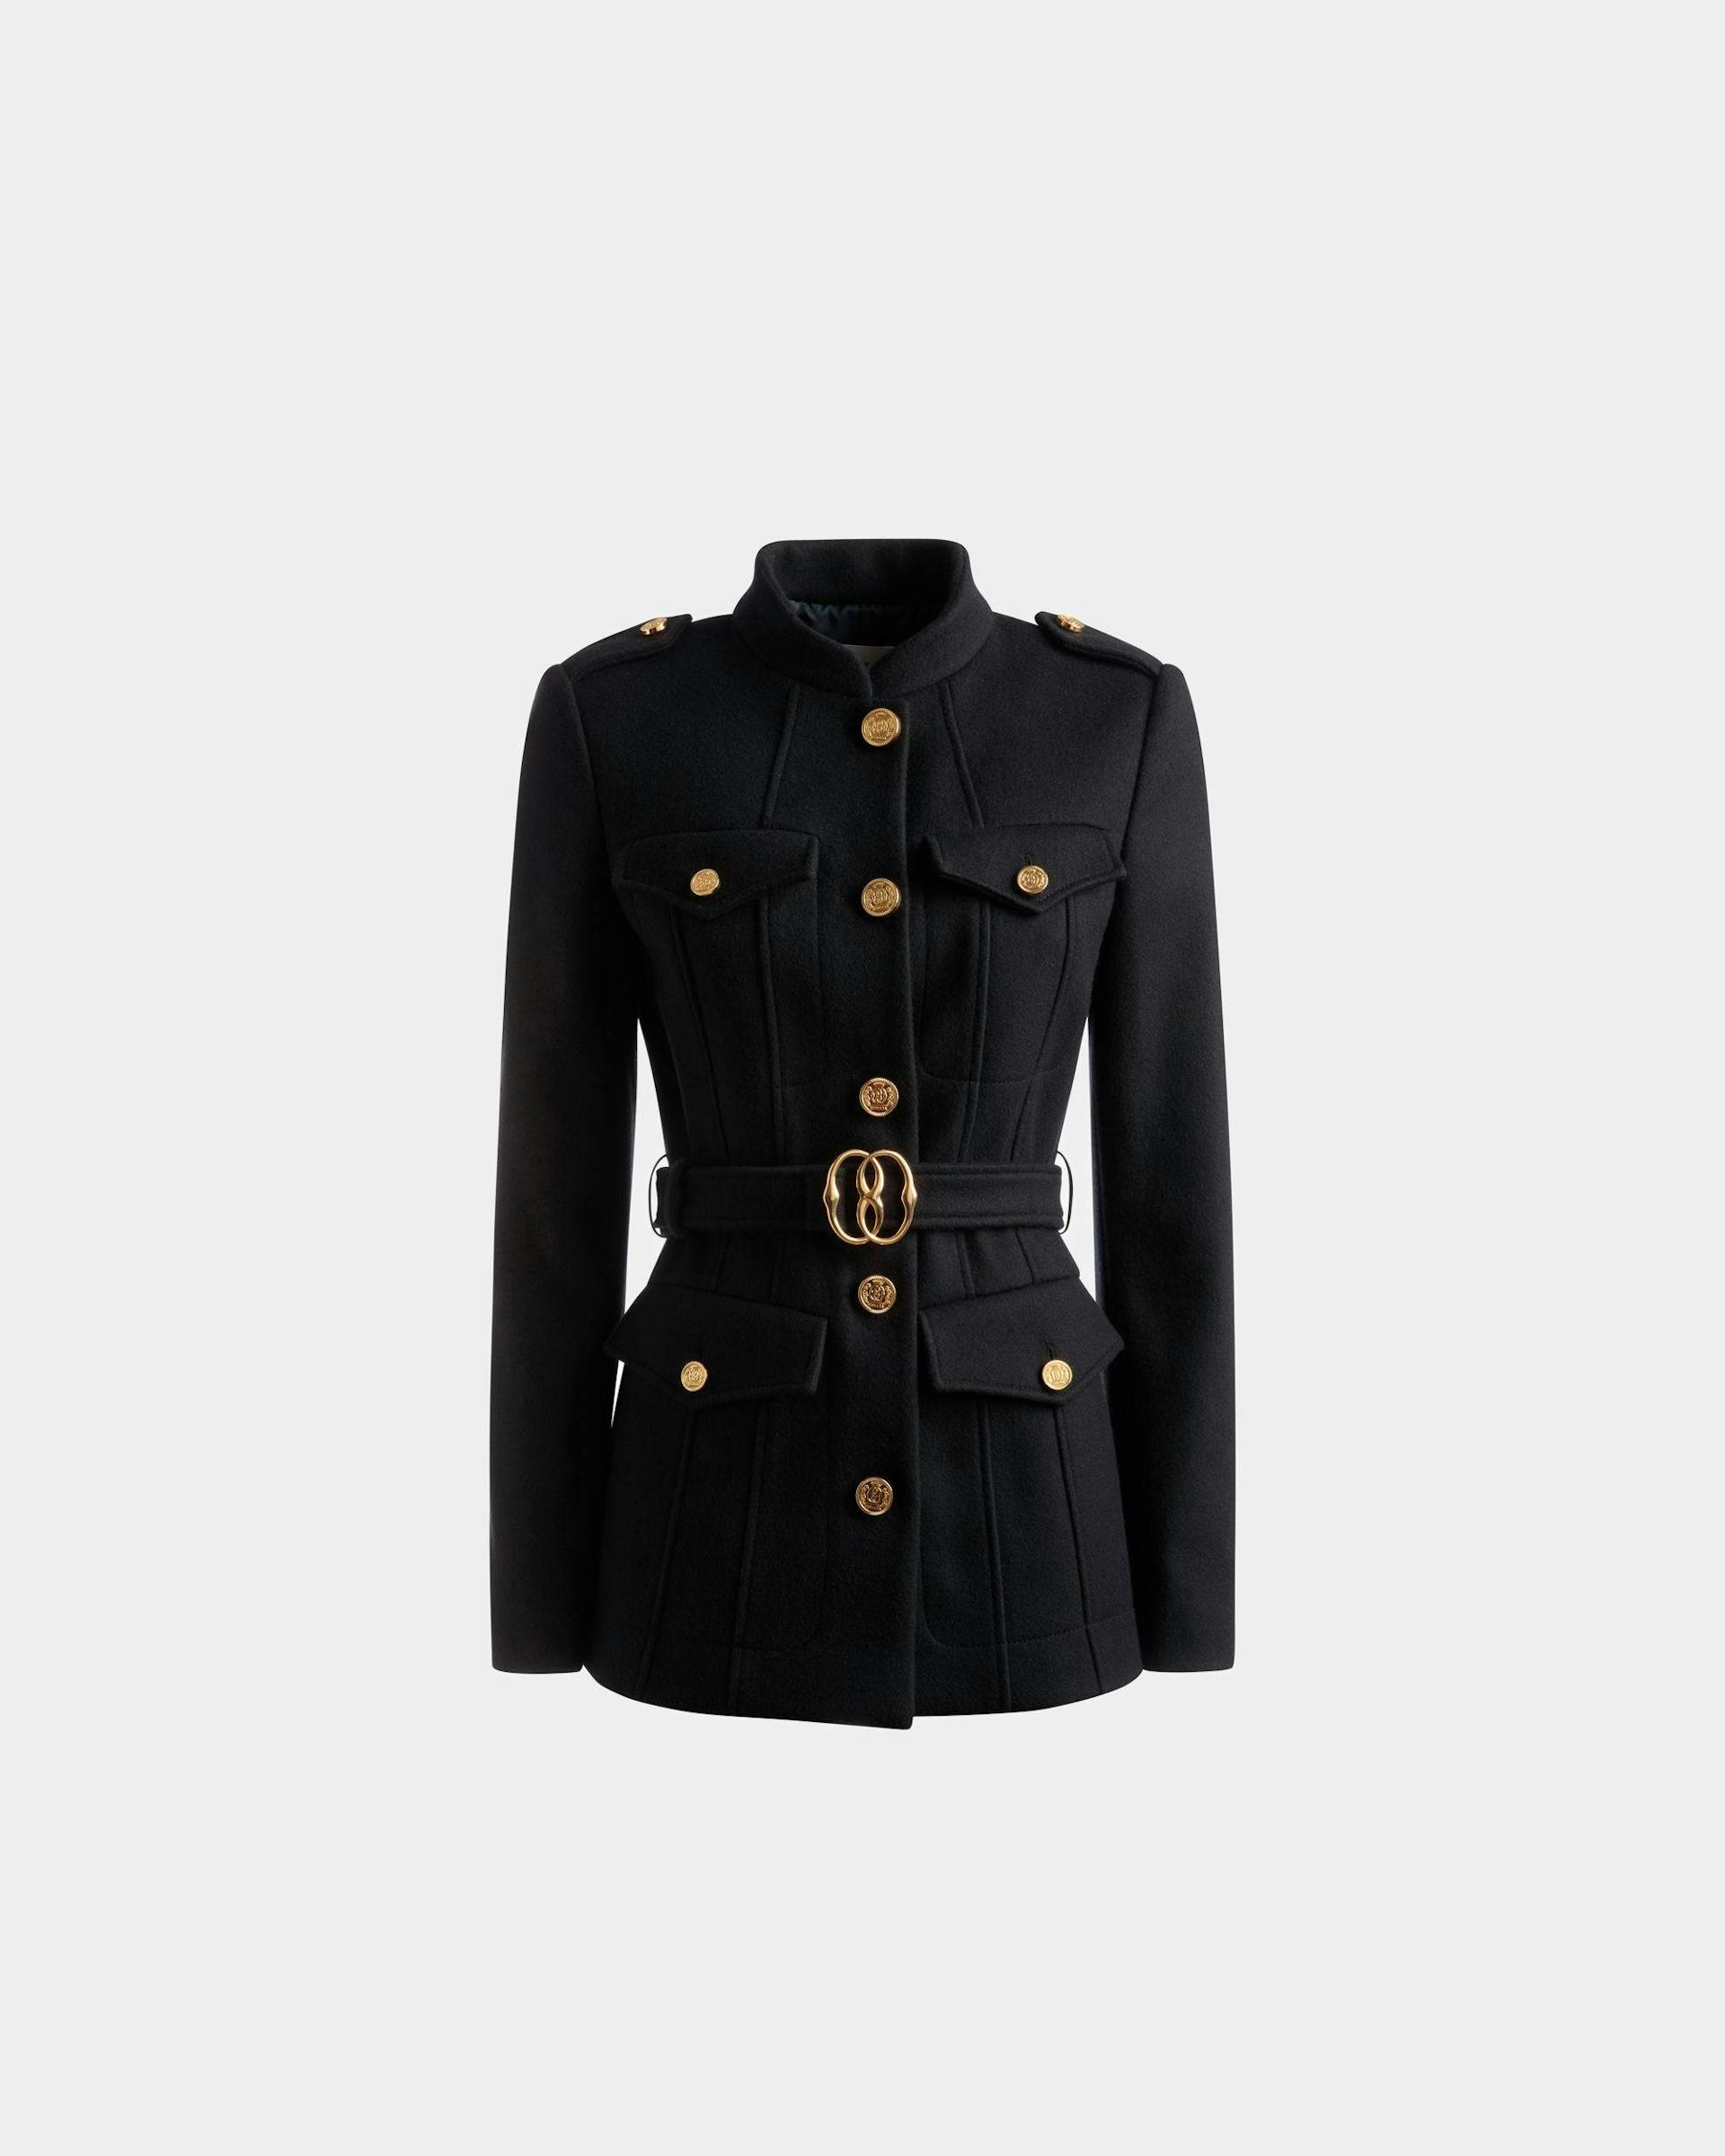 Women's Belted Jacket In Navy Wool | Bally | Still Life Front